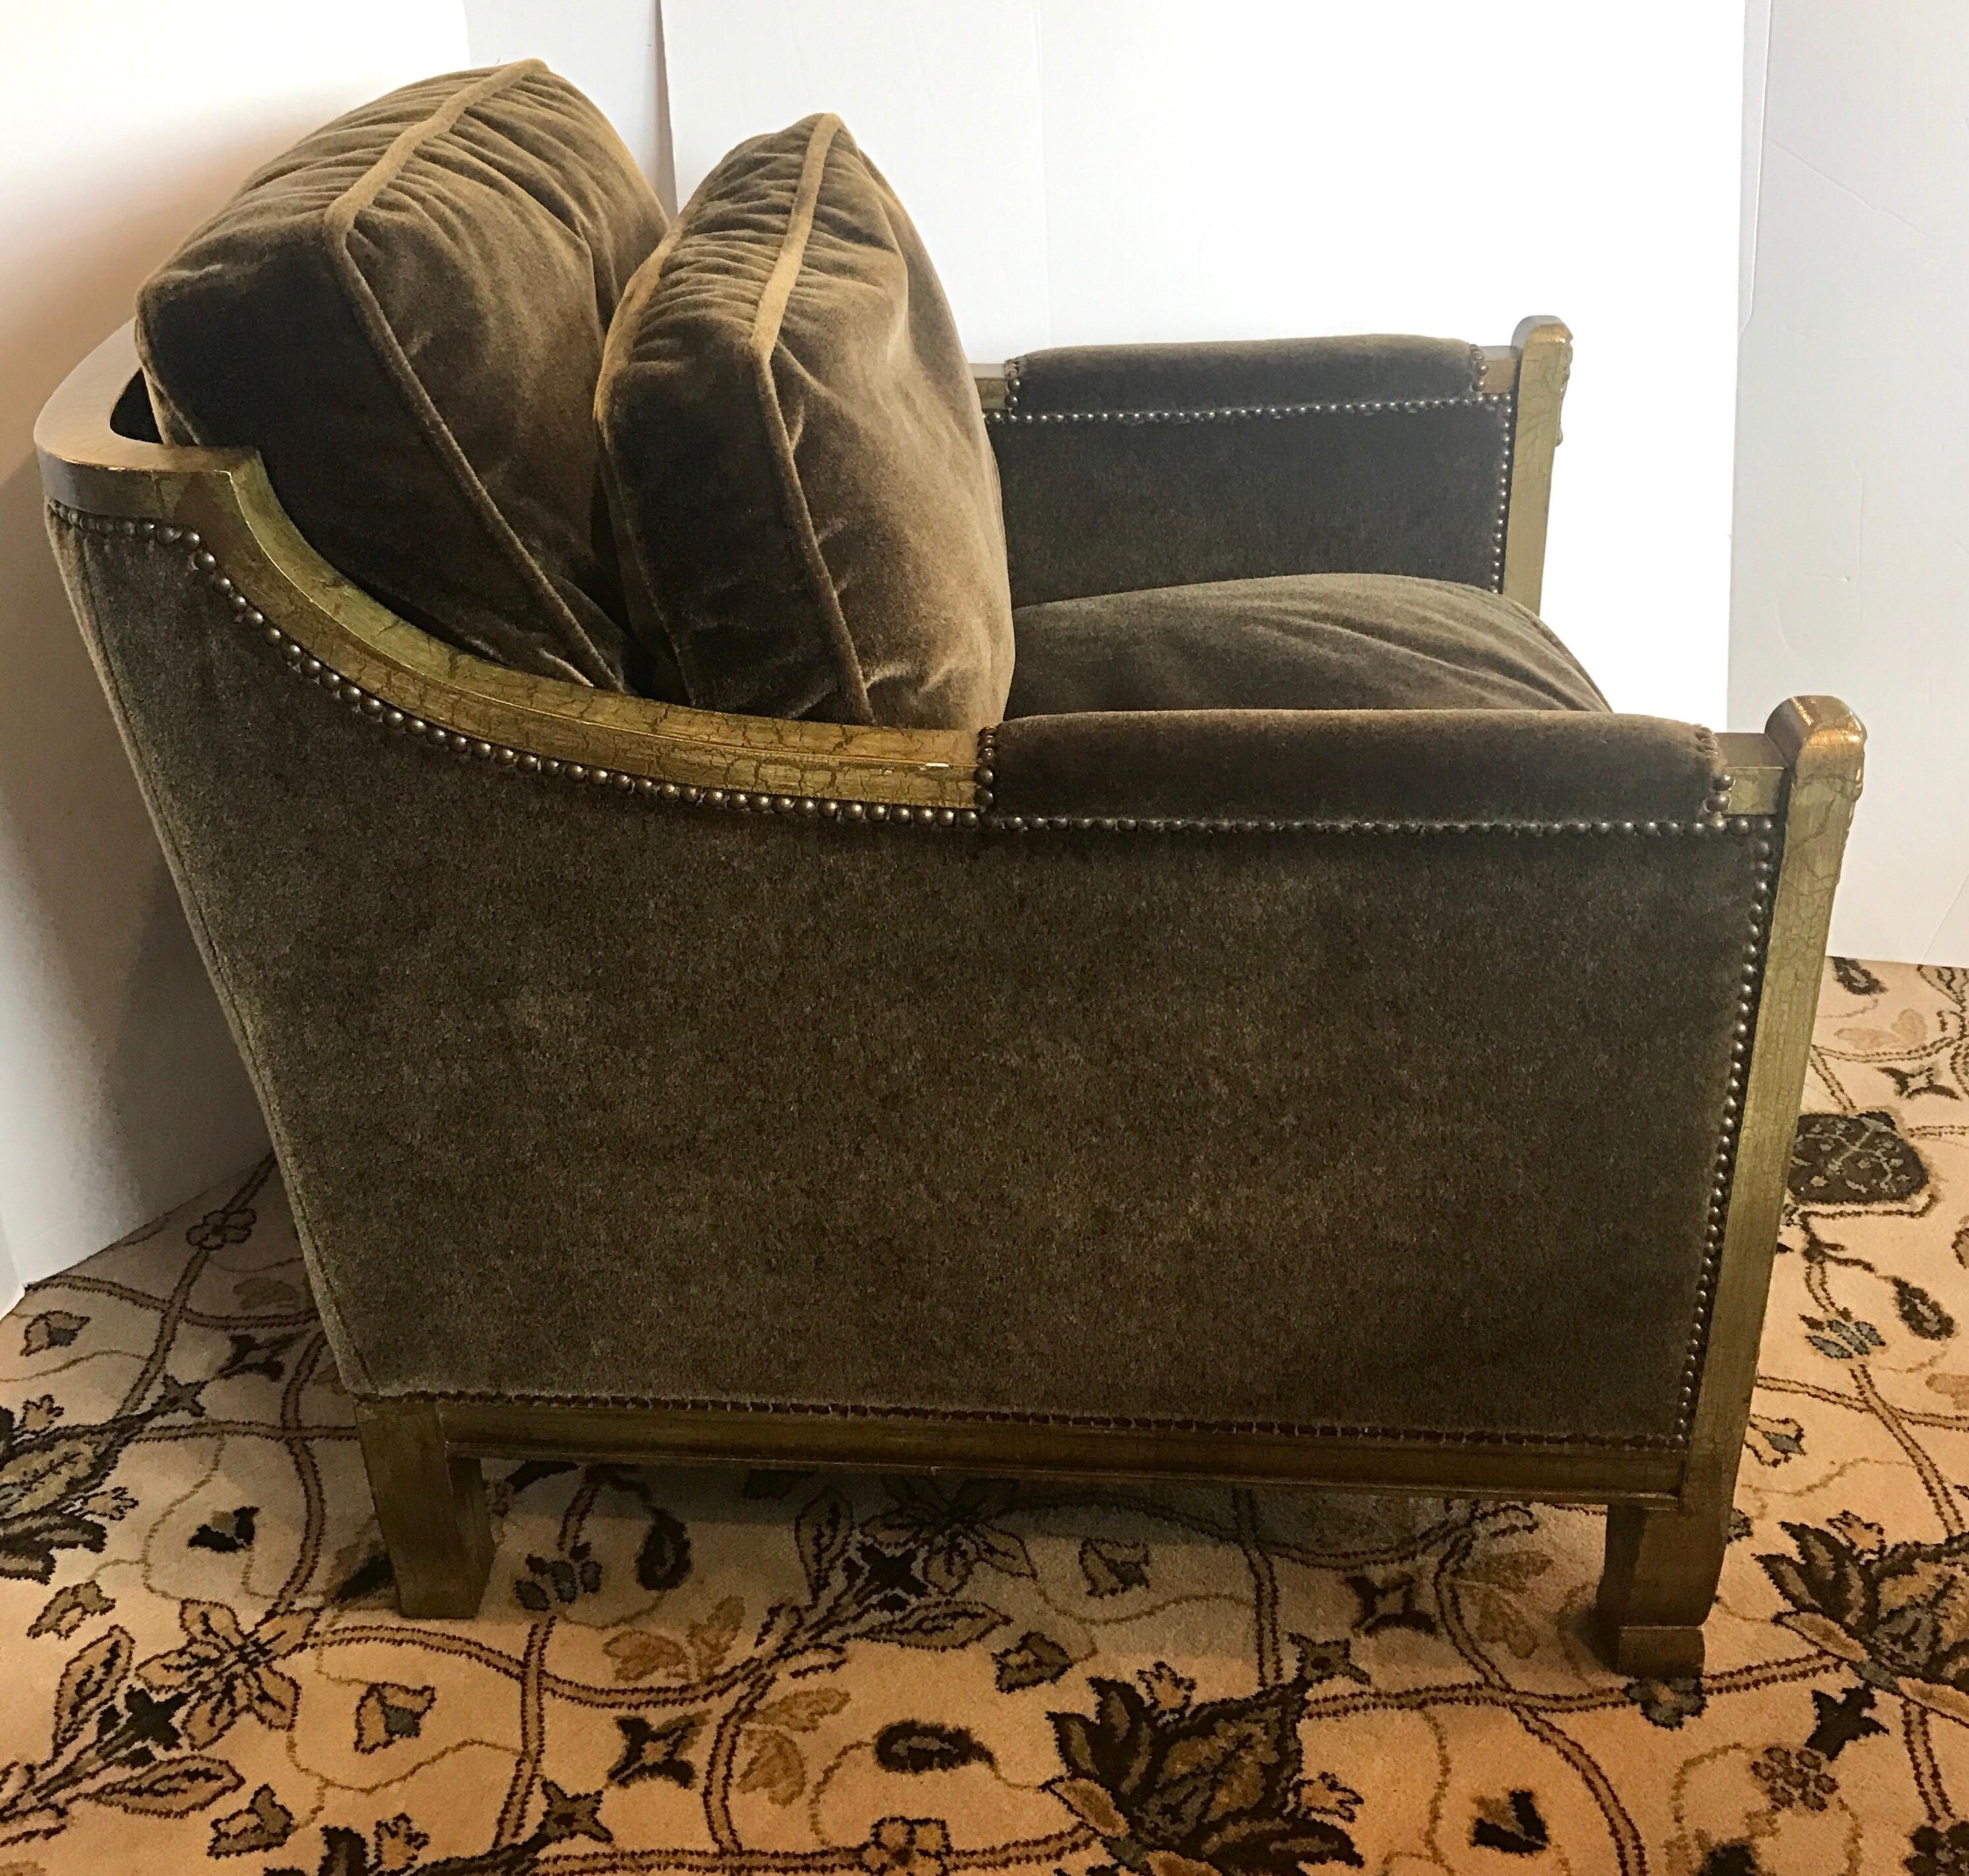 Pair of chic neoclassical style club chairs with a carved wood frame in a distressed gold finish and upholstered in a luxurious mohair velvet in an olive green color. Trimmed in brass nail heads all around. Very comfortable with three loose down